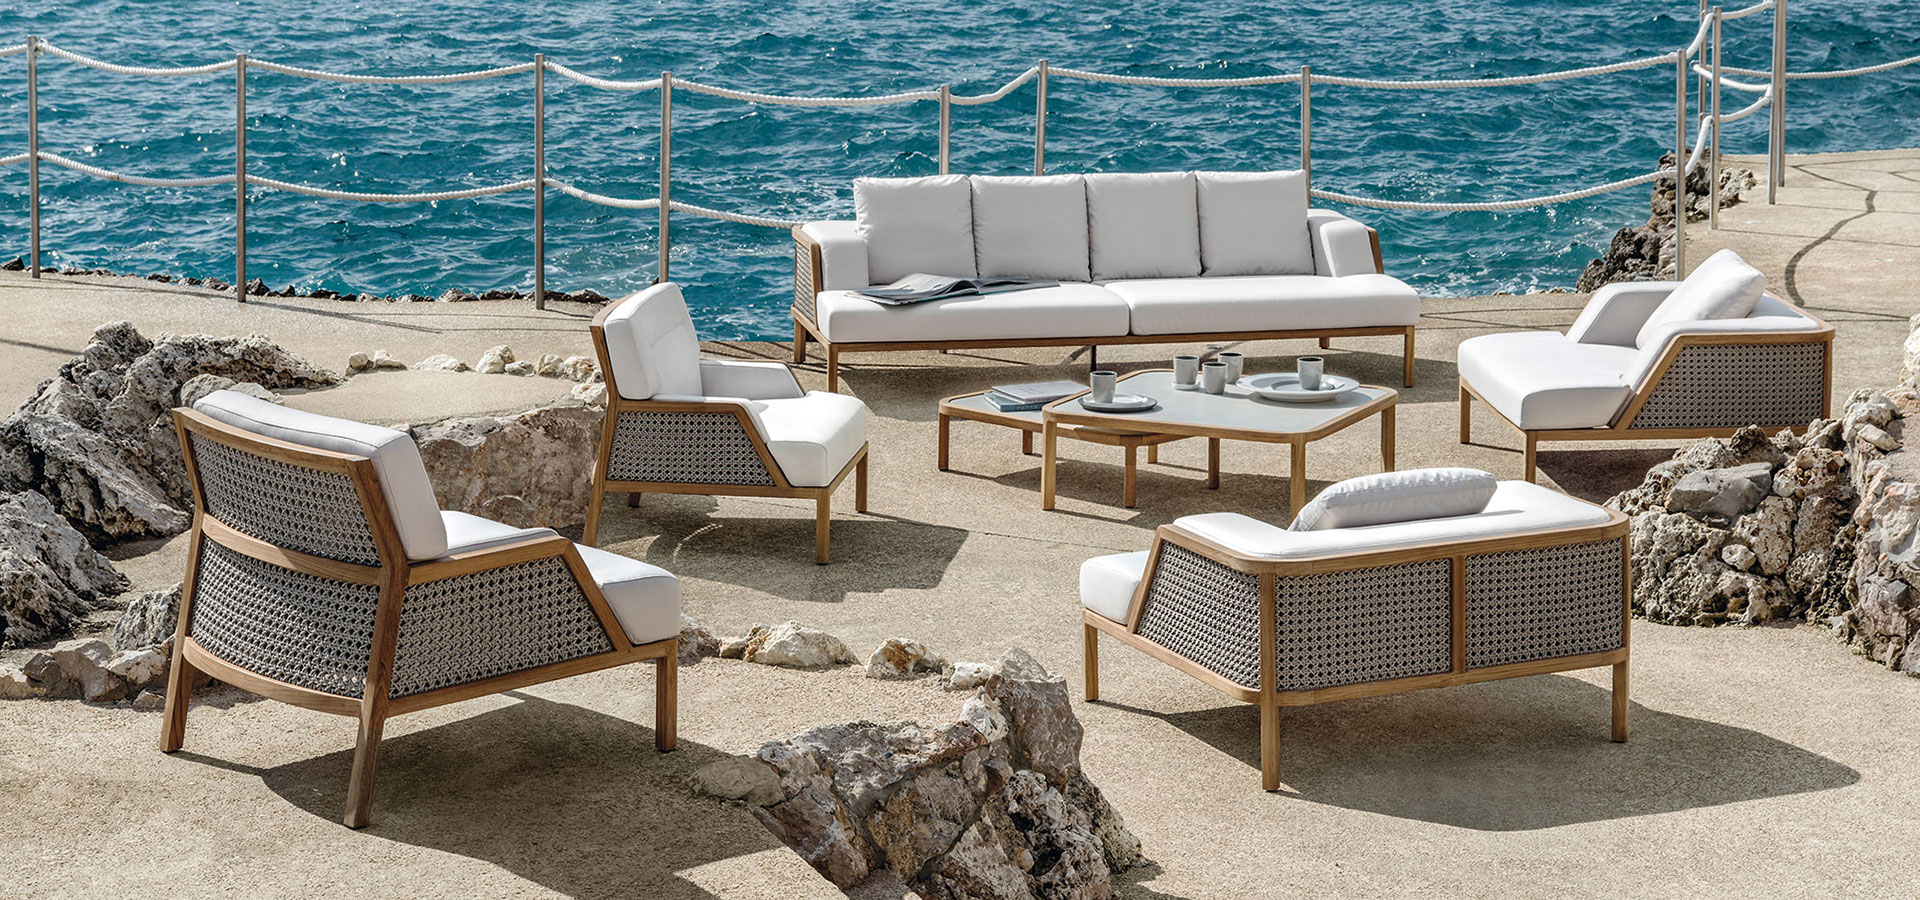 Grand Life outdoor furniture by Ethimo